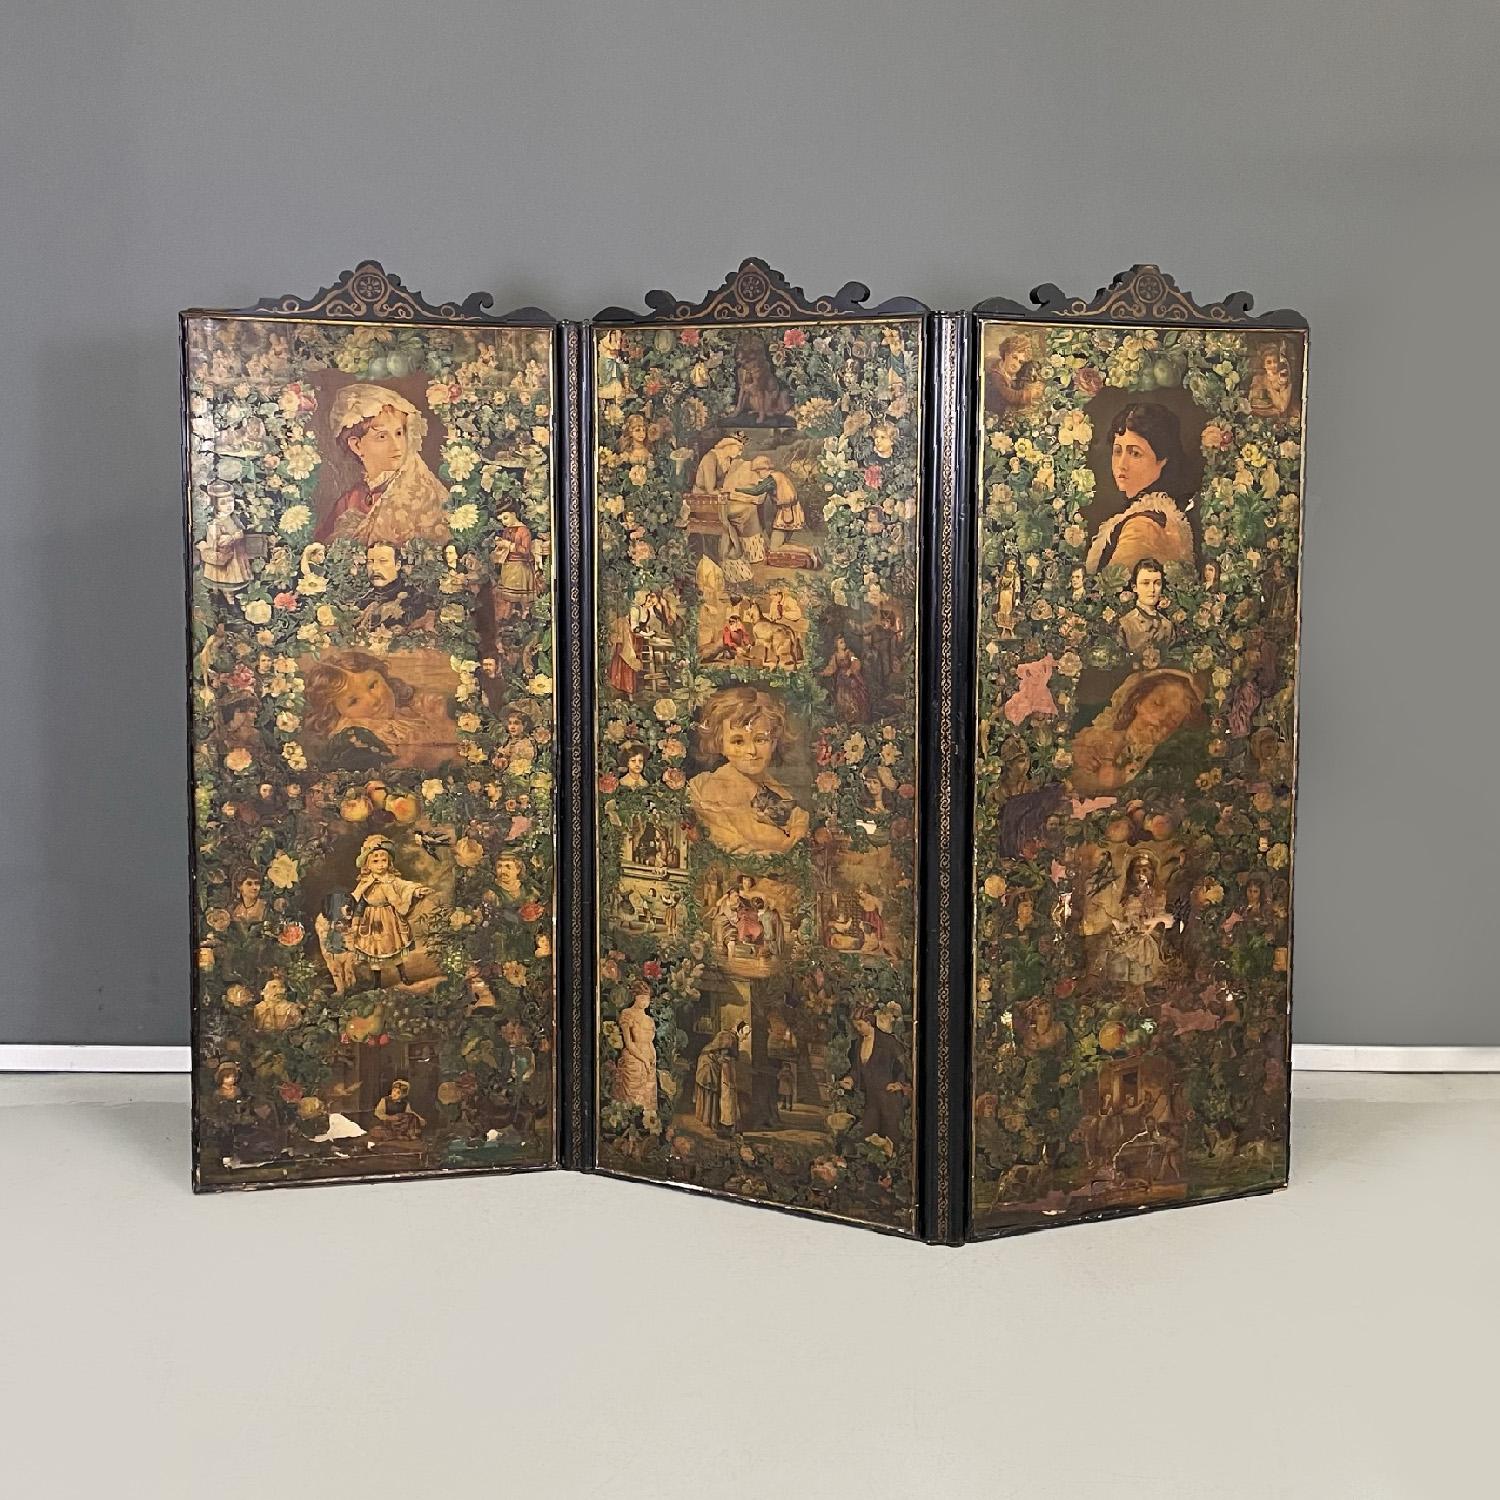 English wooden screen with portraits and floral collage, 1800s
Three-door screen with wooden structure and entirely decorated with the collage technique. On each side there are floral motifs framing busts and figurines of noble or royal persons of